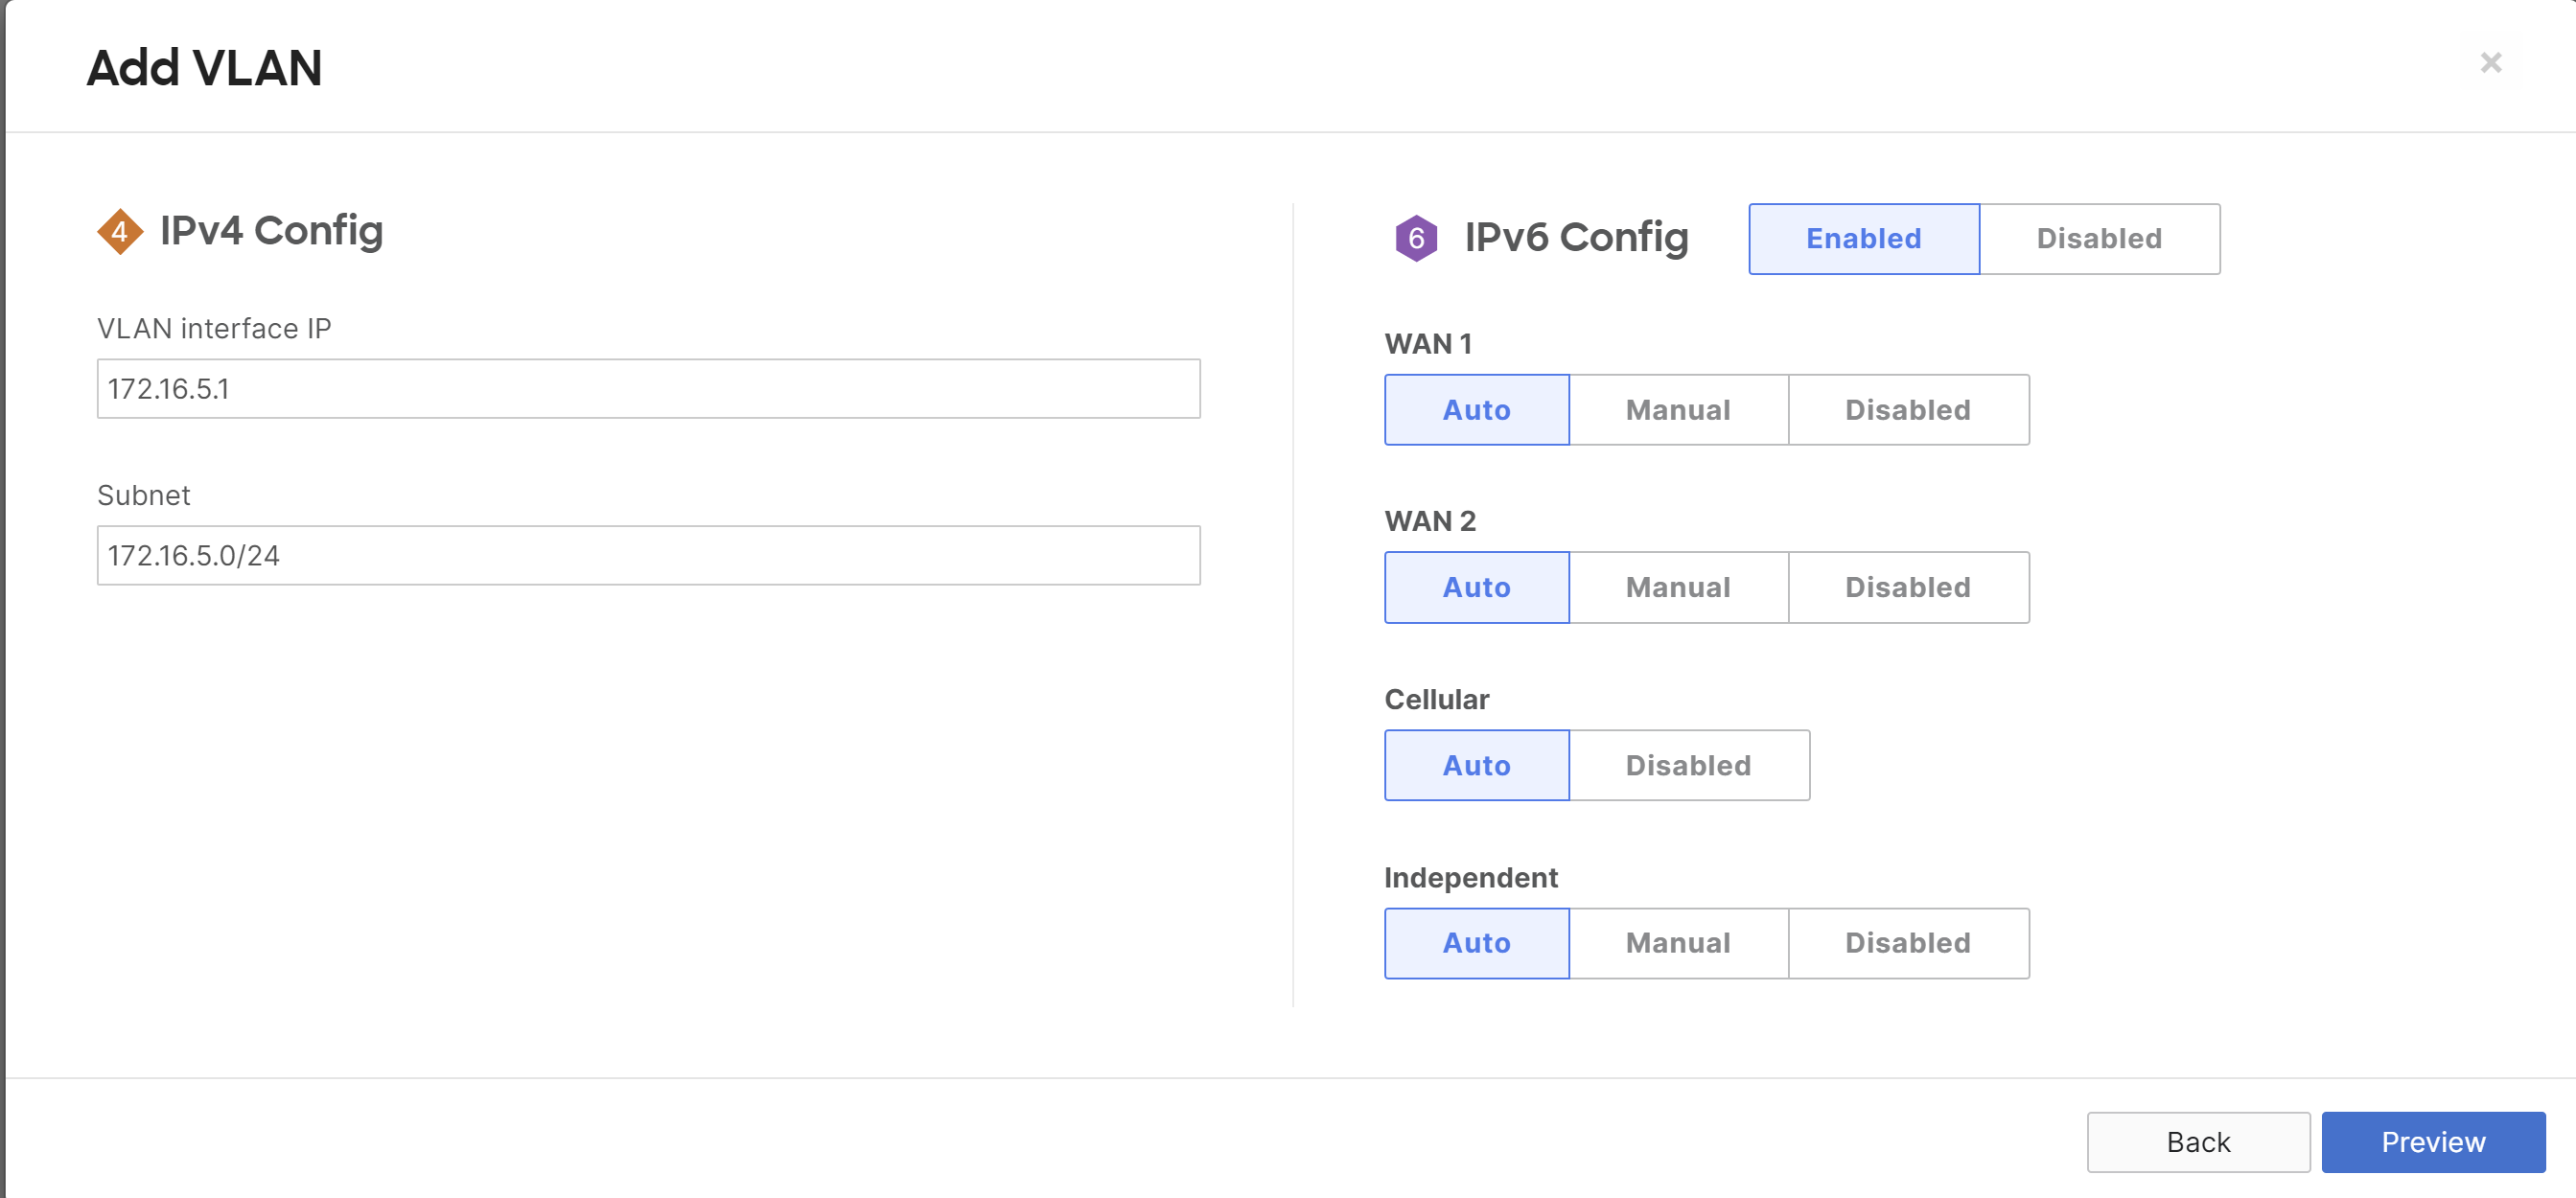 Ensure IPv6 Config is set to Enabled and the appropriate WANs to Auto and click preview